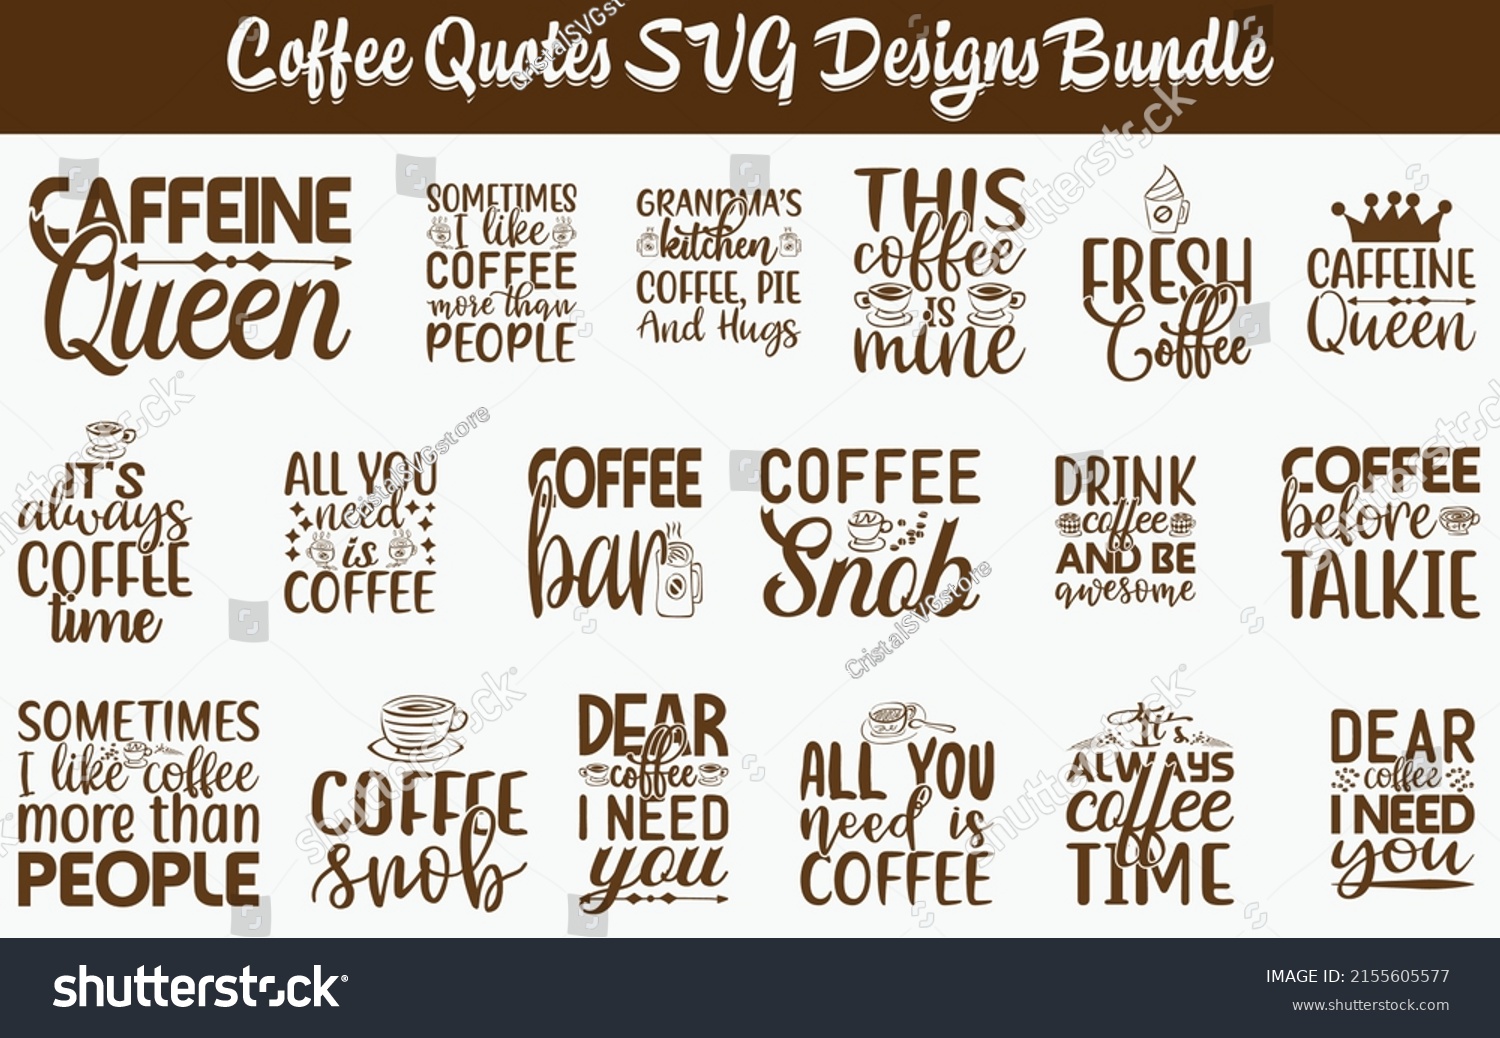 SVG of Coffee Quotes SVG Cut Files Designs Bundle, Coffee quotes SVG cut files, Coffee quotes t shirt designs, Saying about caffeine, caffeine cut files, brew quotes eps files, Saying of brew, svg